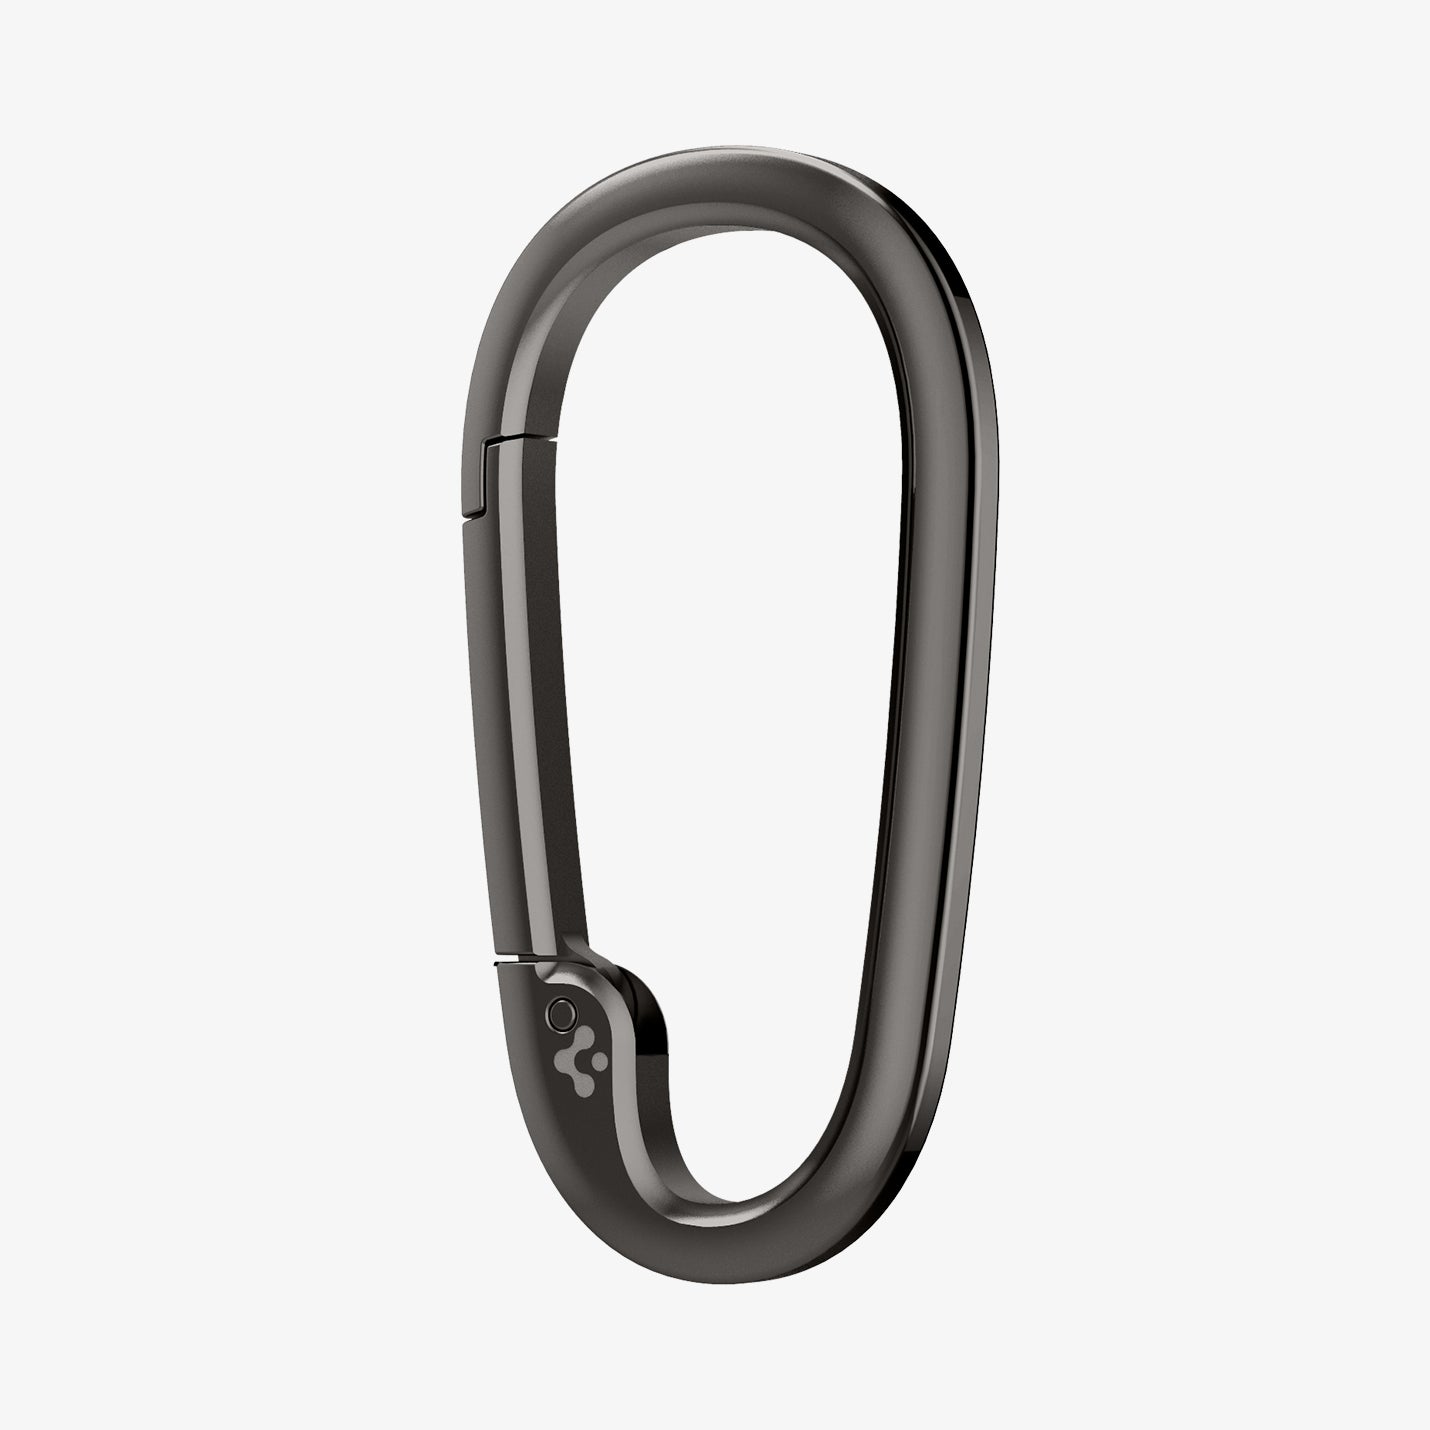 AHP02932 - Carabiner Basic Type in black showing the front and partial side